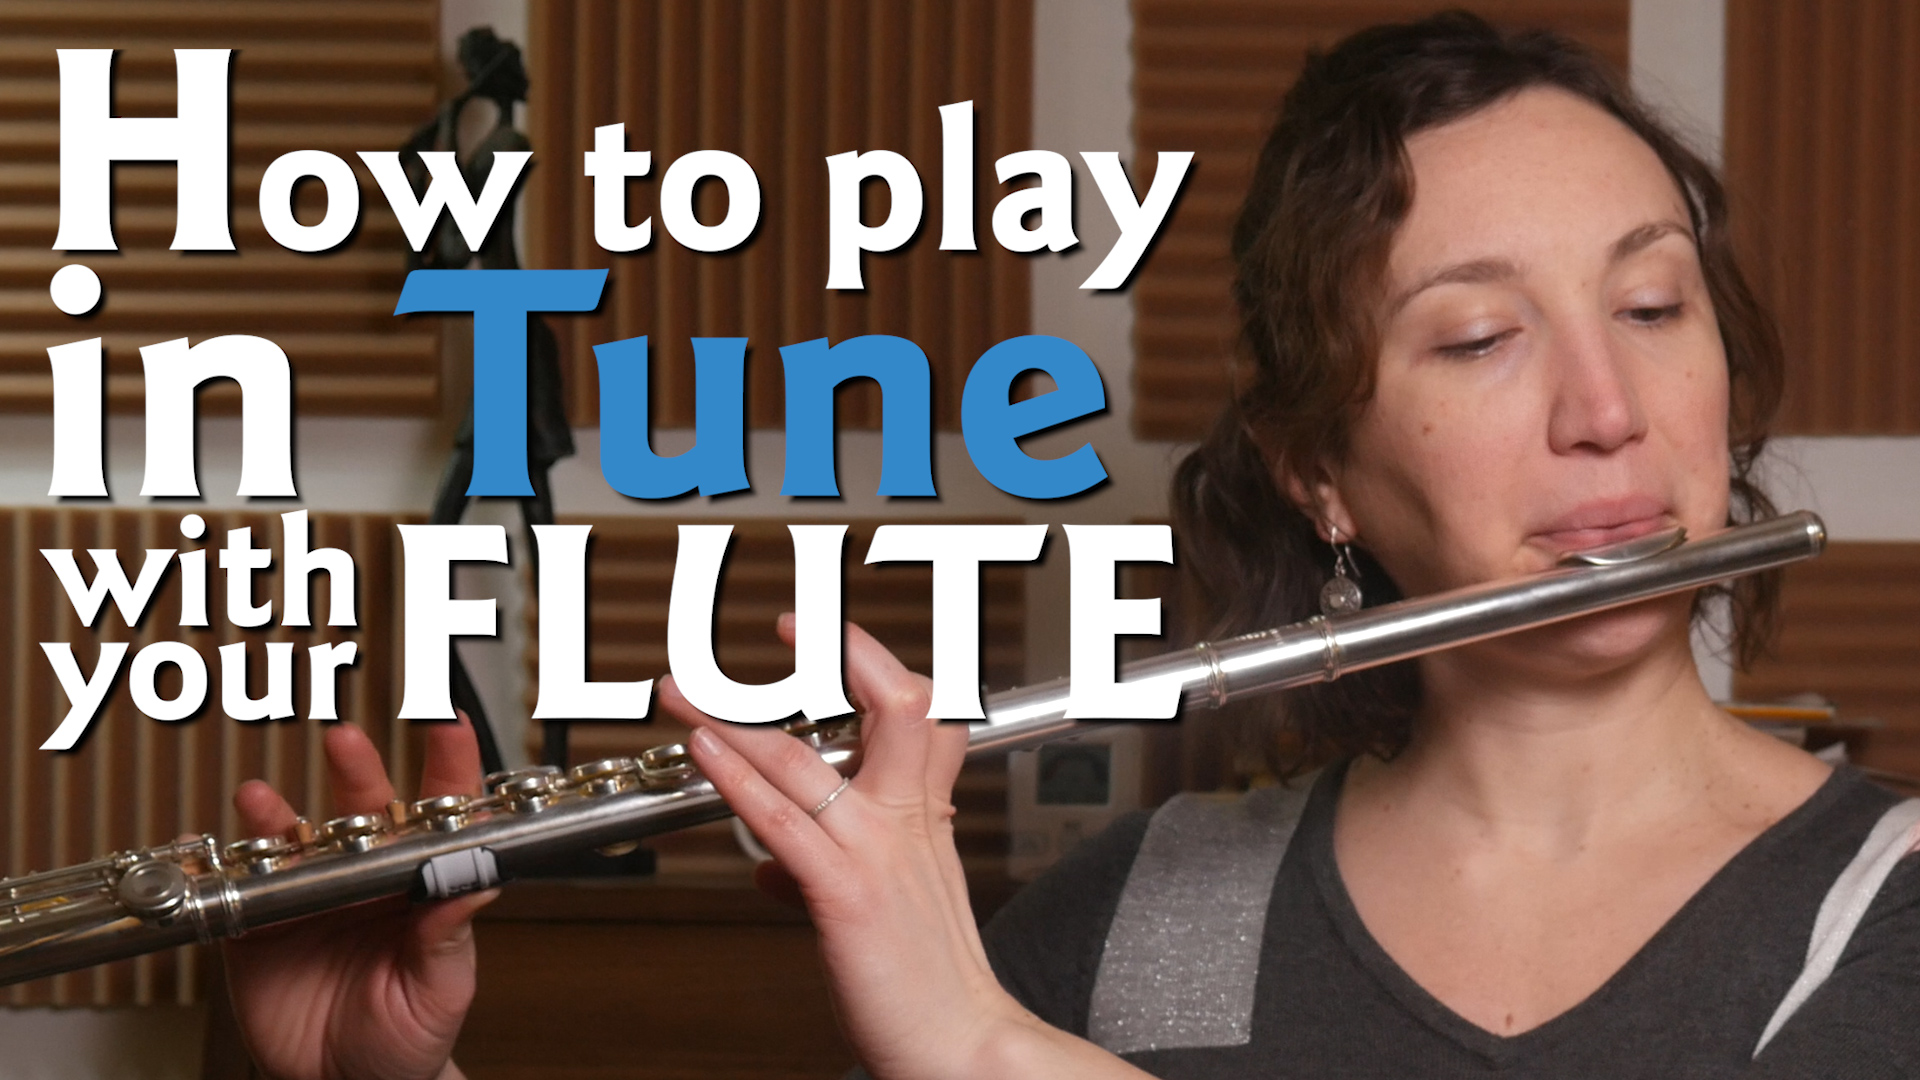 Play the flute. How to Play the Flute. The Flute Tune. Playing Flute. A playwright a Flute.